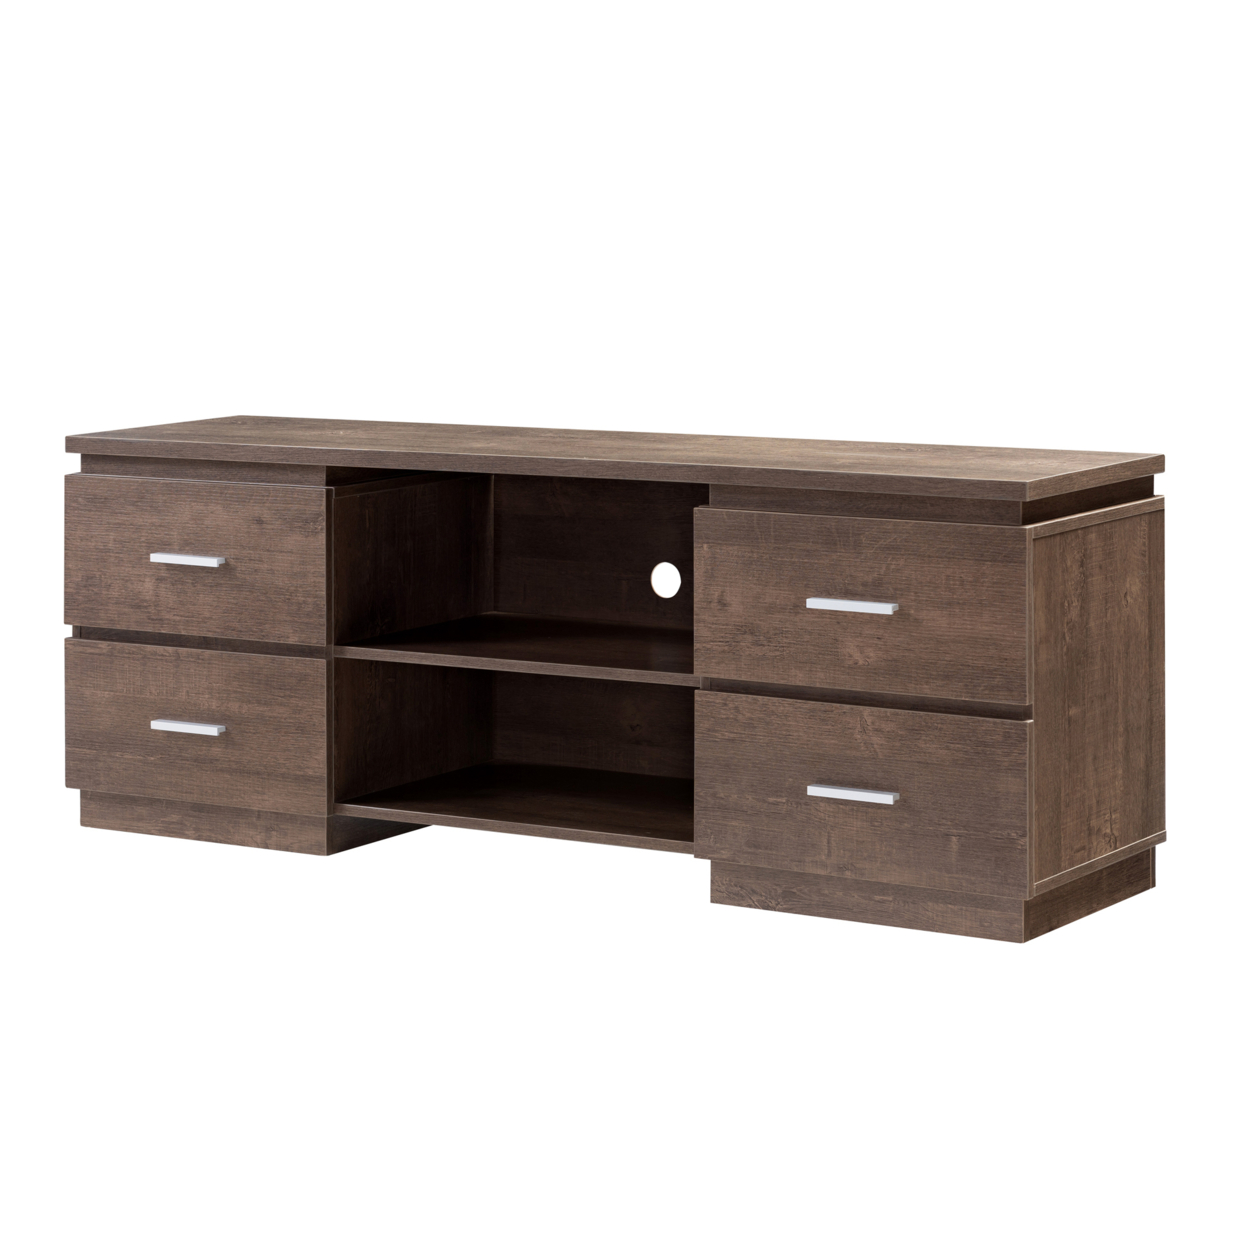 Transitional Wooden TV Stand With 2 Open Shelves And 4 Drawers, Brown- Saltoro Sherpi